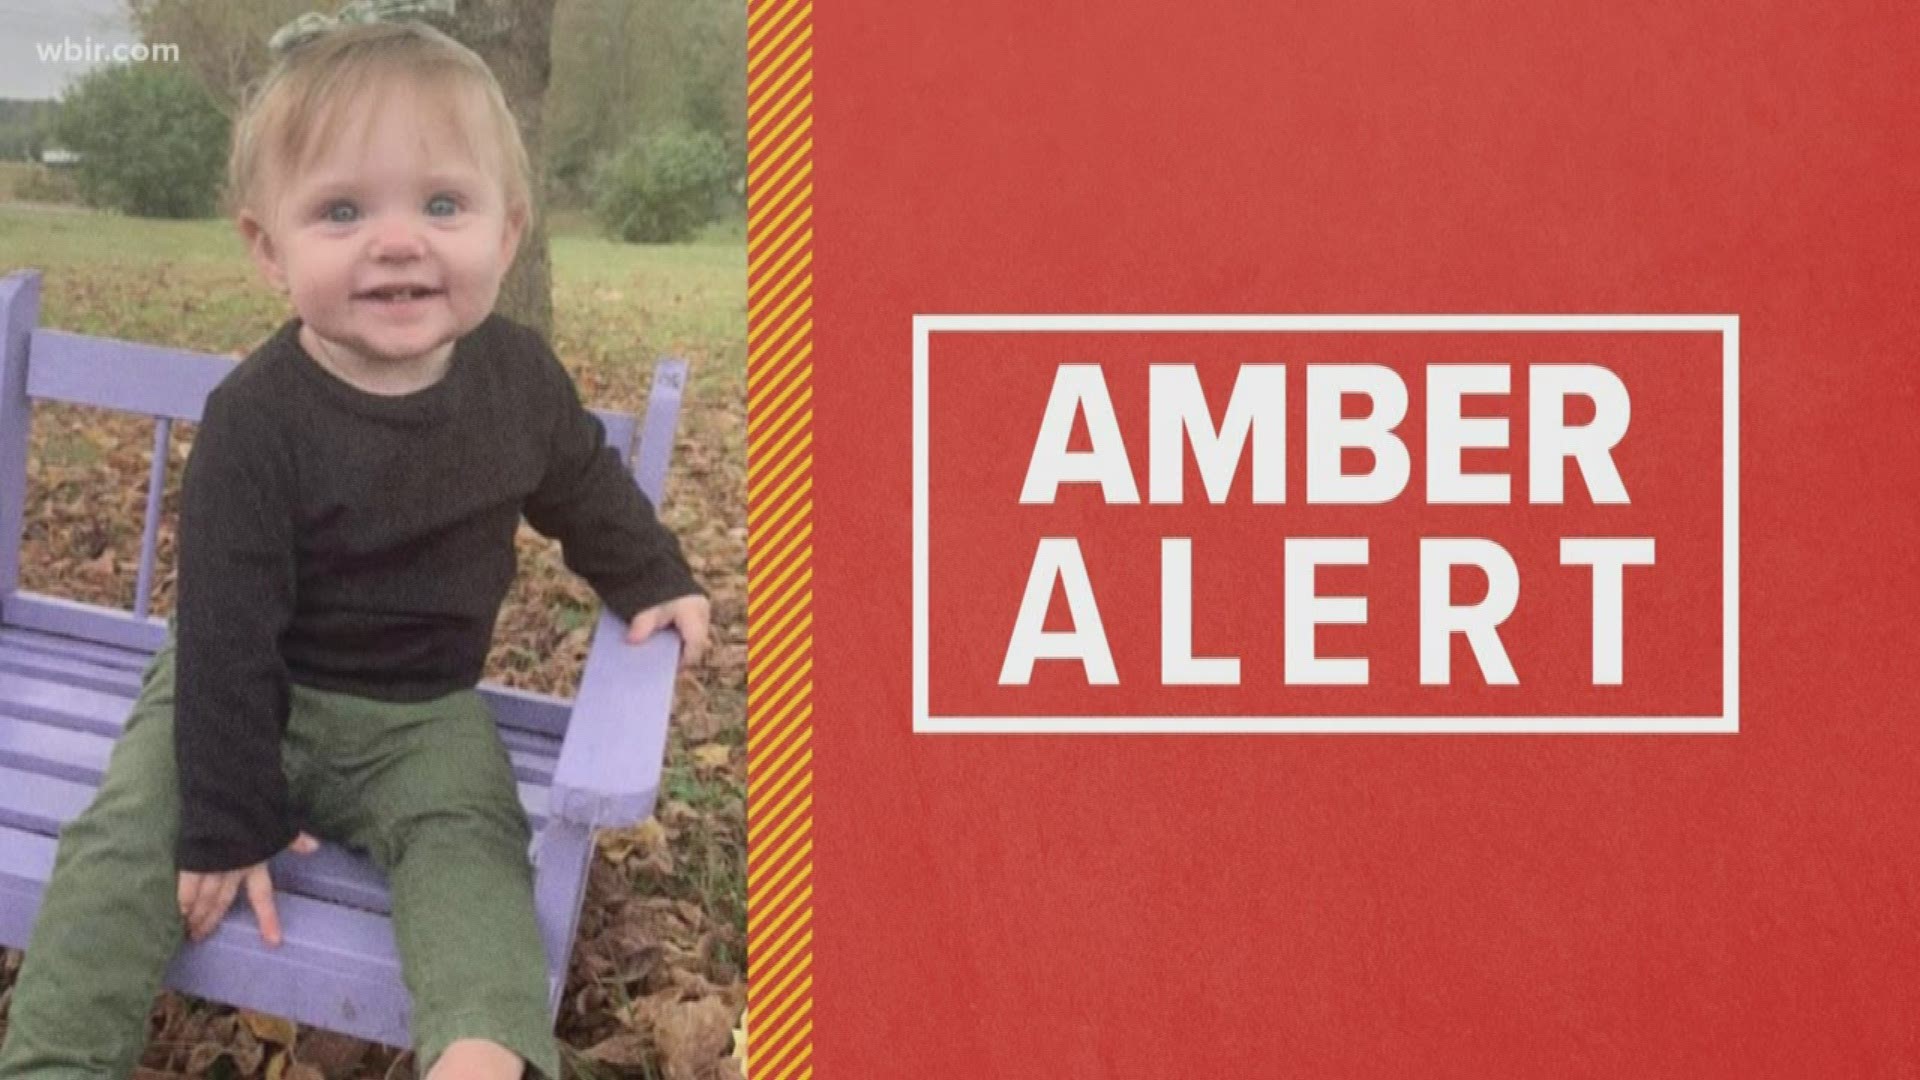 TBI said it received more than 750 tips about the missing toddler, who has not been seen since mid-December.